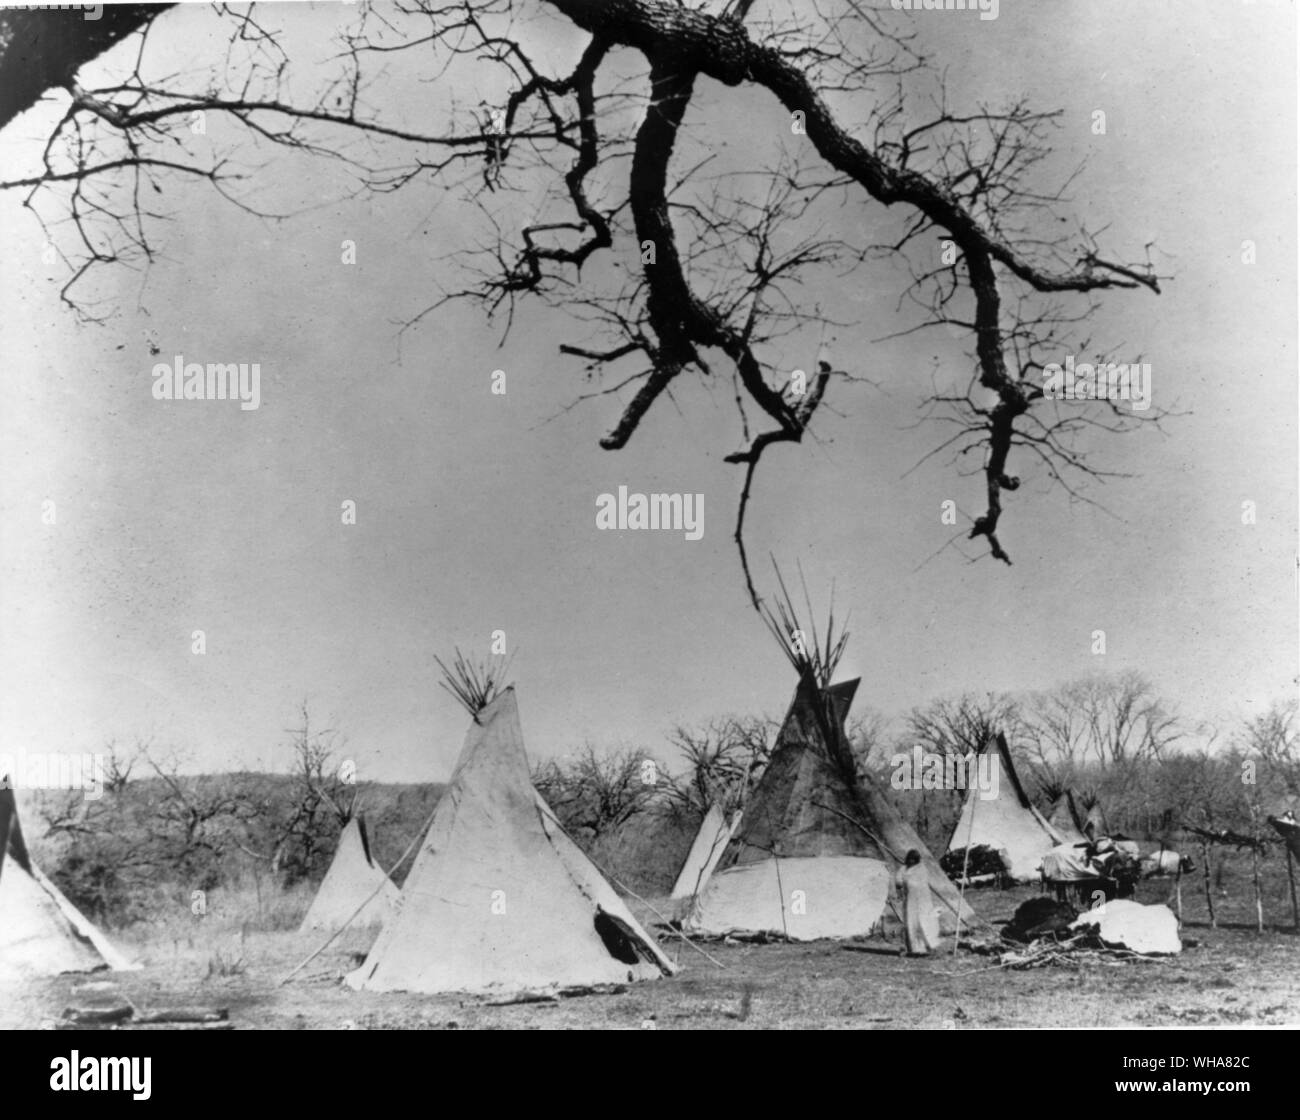 Quir-par-ke (Guipage) or Lone Wolf's camp at Fort Sill. Indian Territory. after the battle of the Palo Duro Canyon. 1874. PALO DURO CANYON, BATTLE OF. The battle of Palo Duro Canyon was the major battle of the Red River War,qv which ended in the confinement of southern Plains Indians (Comanches, Kiowas, Kiowa Apaches, Cheyennes, and Arapahos) to the reservations in the Indian Territory. By late September 1874 the warring Indians had camped in the protection of Palo Duro Canyon, where a Kiowa shaman, Maman-ti,qv promised them they would be safe. Col. Ranald S. Mackenzieqv led his Fourth United Stock Photo